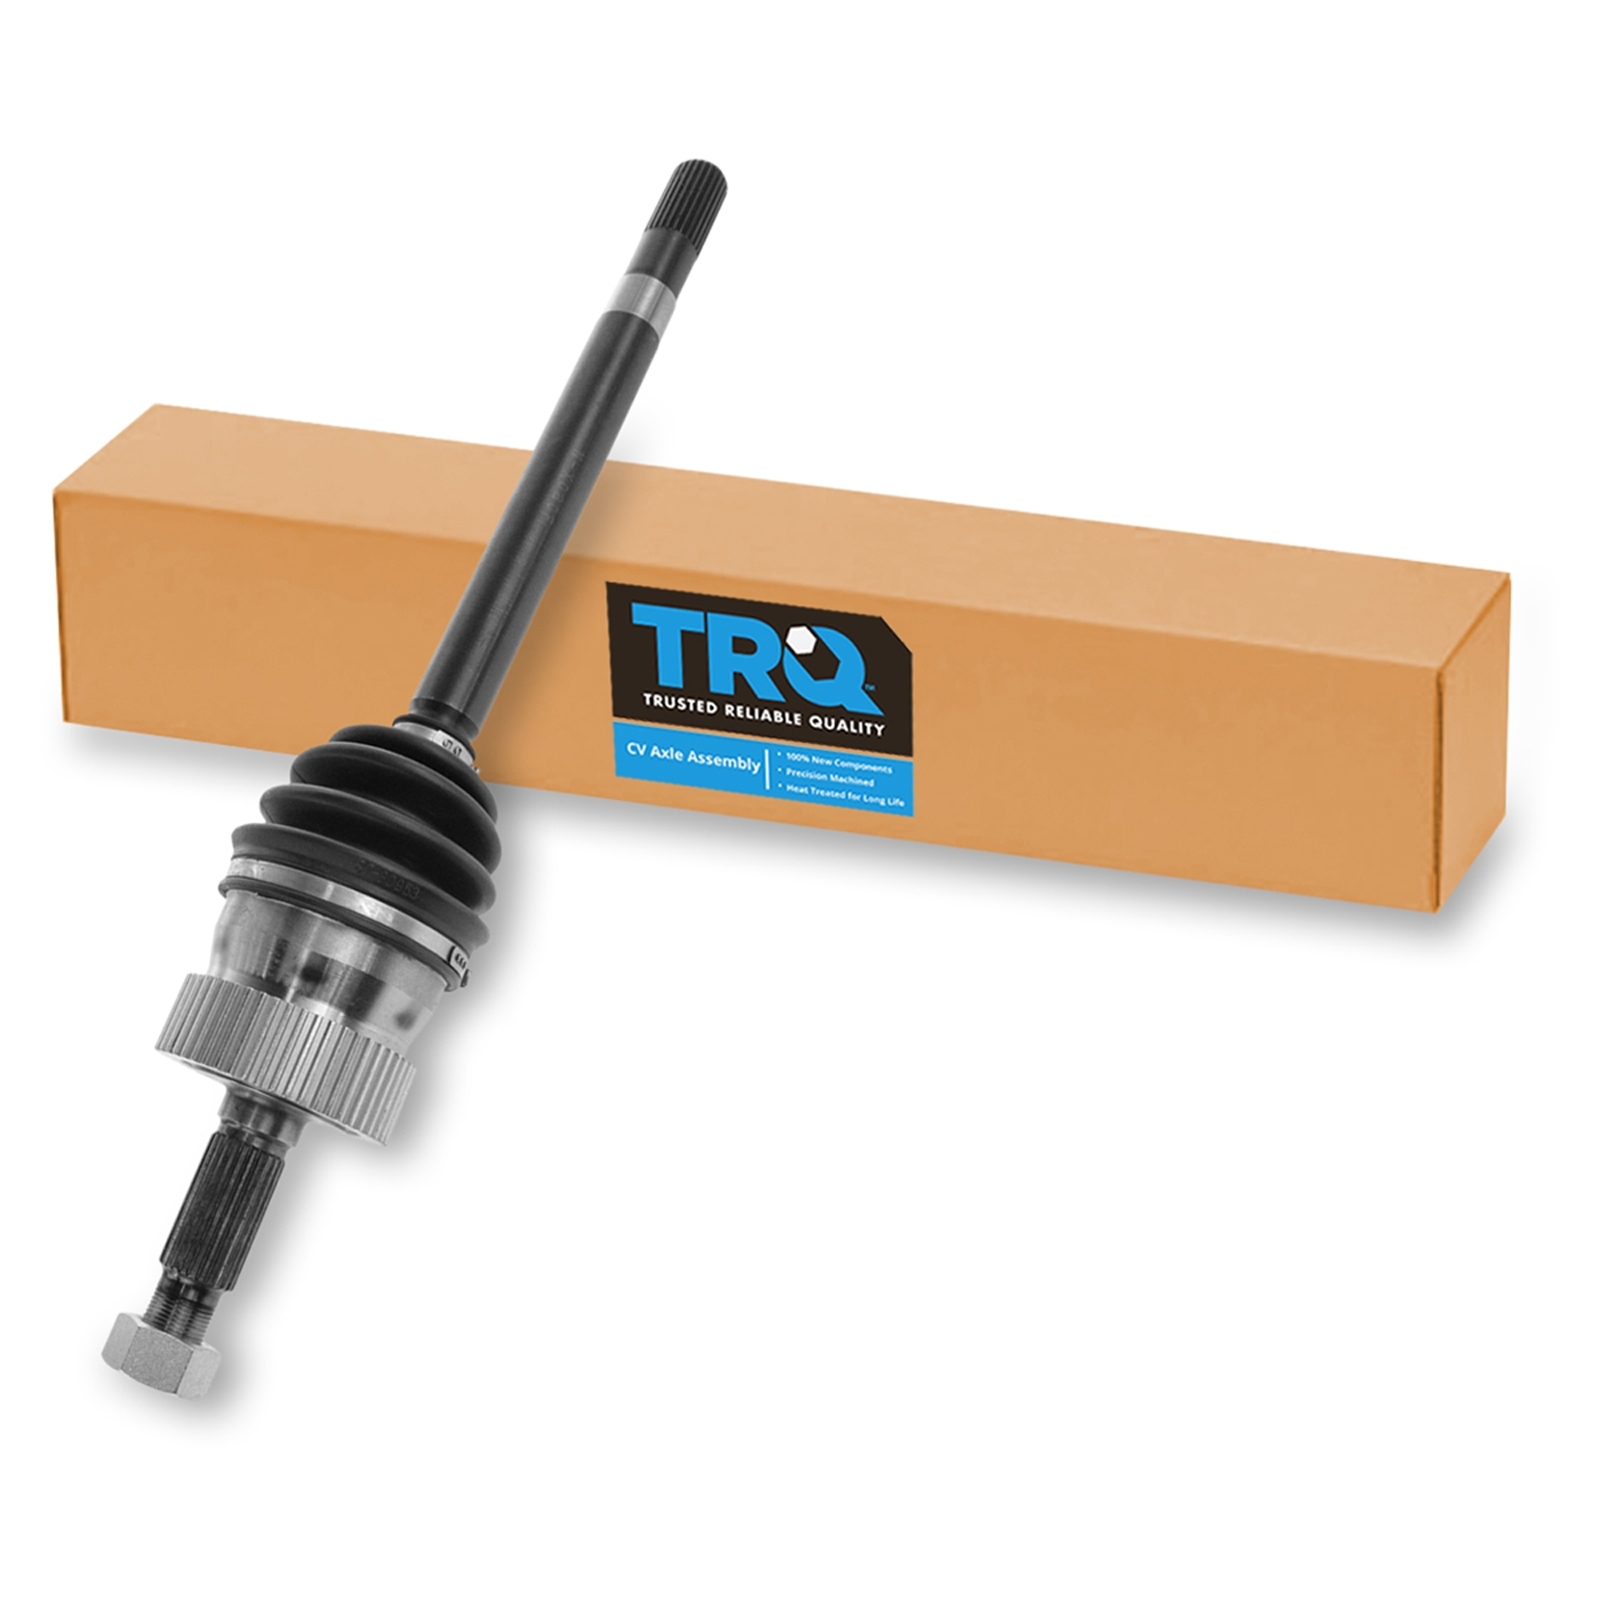 Trq Cv Axle Shaft For 93-98 Grand Cherokee Front Driver Side 93 Grand Wagoneer Front Driver Side,